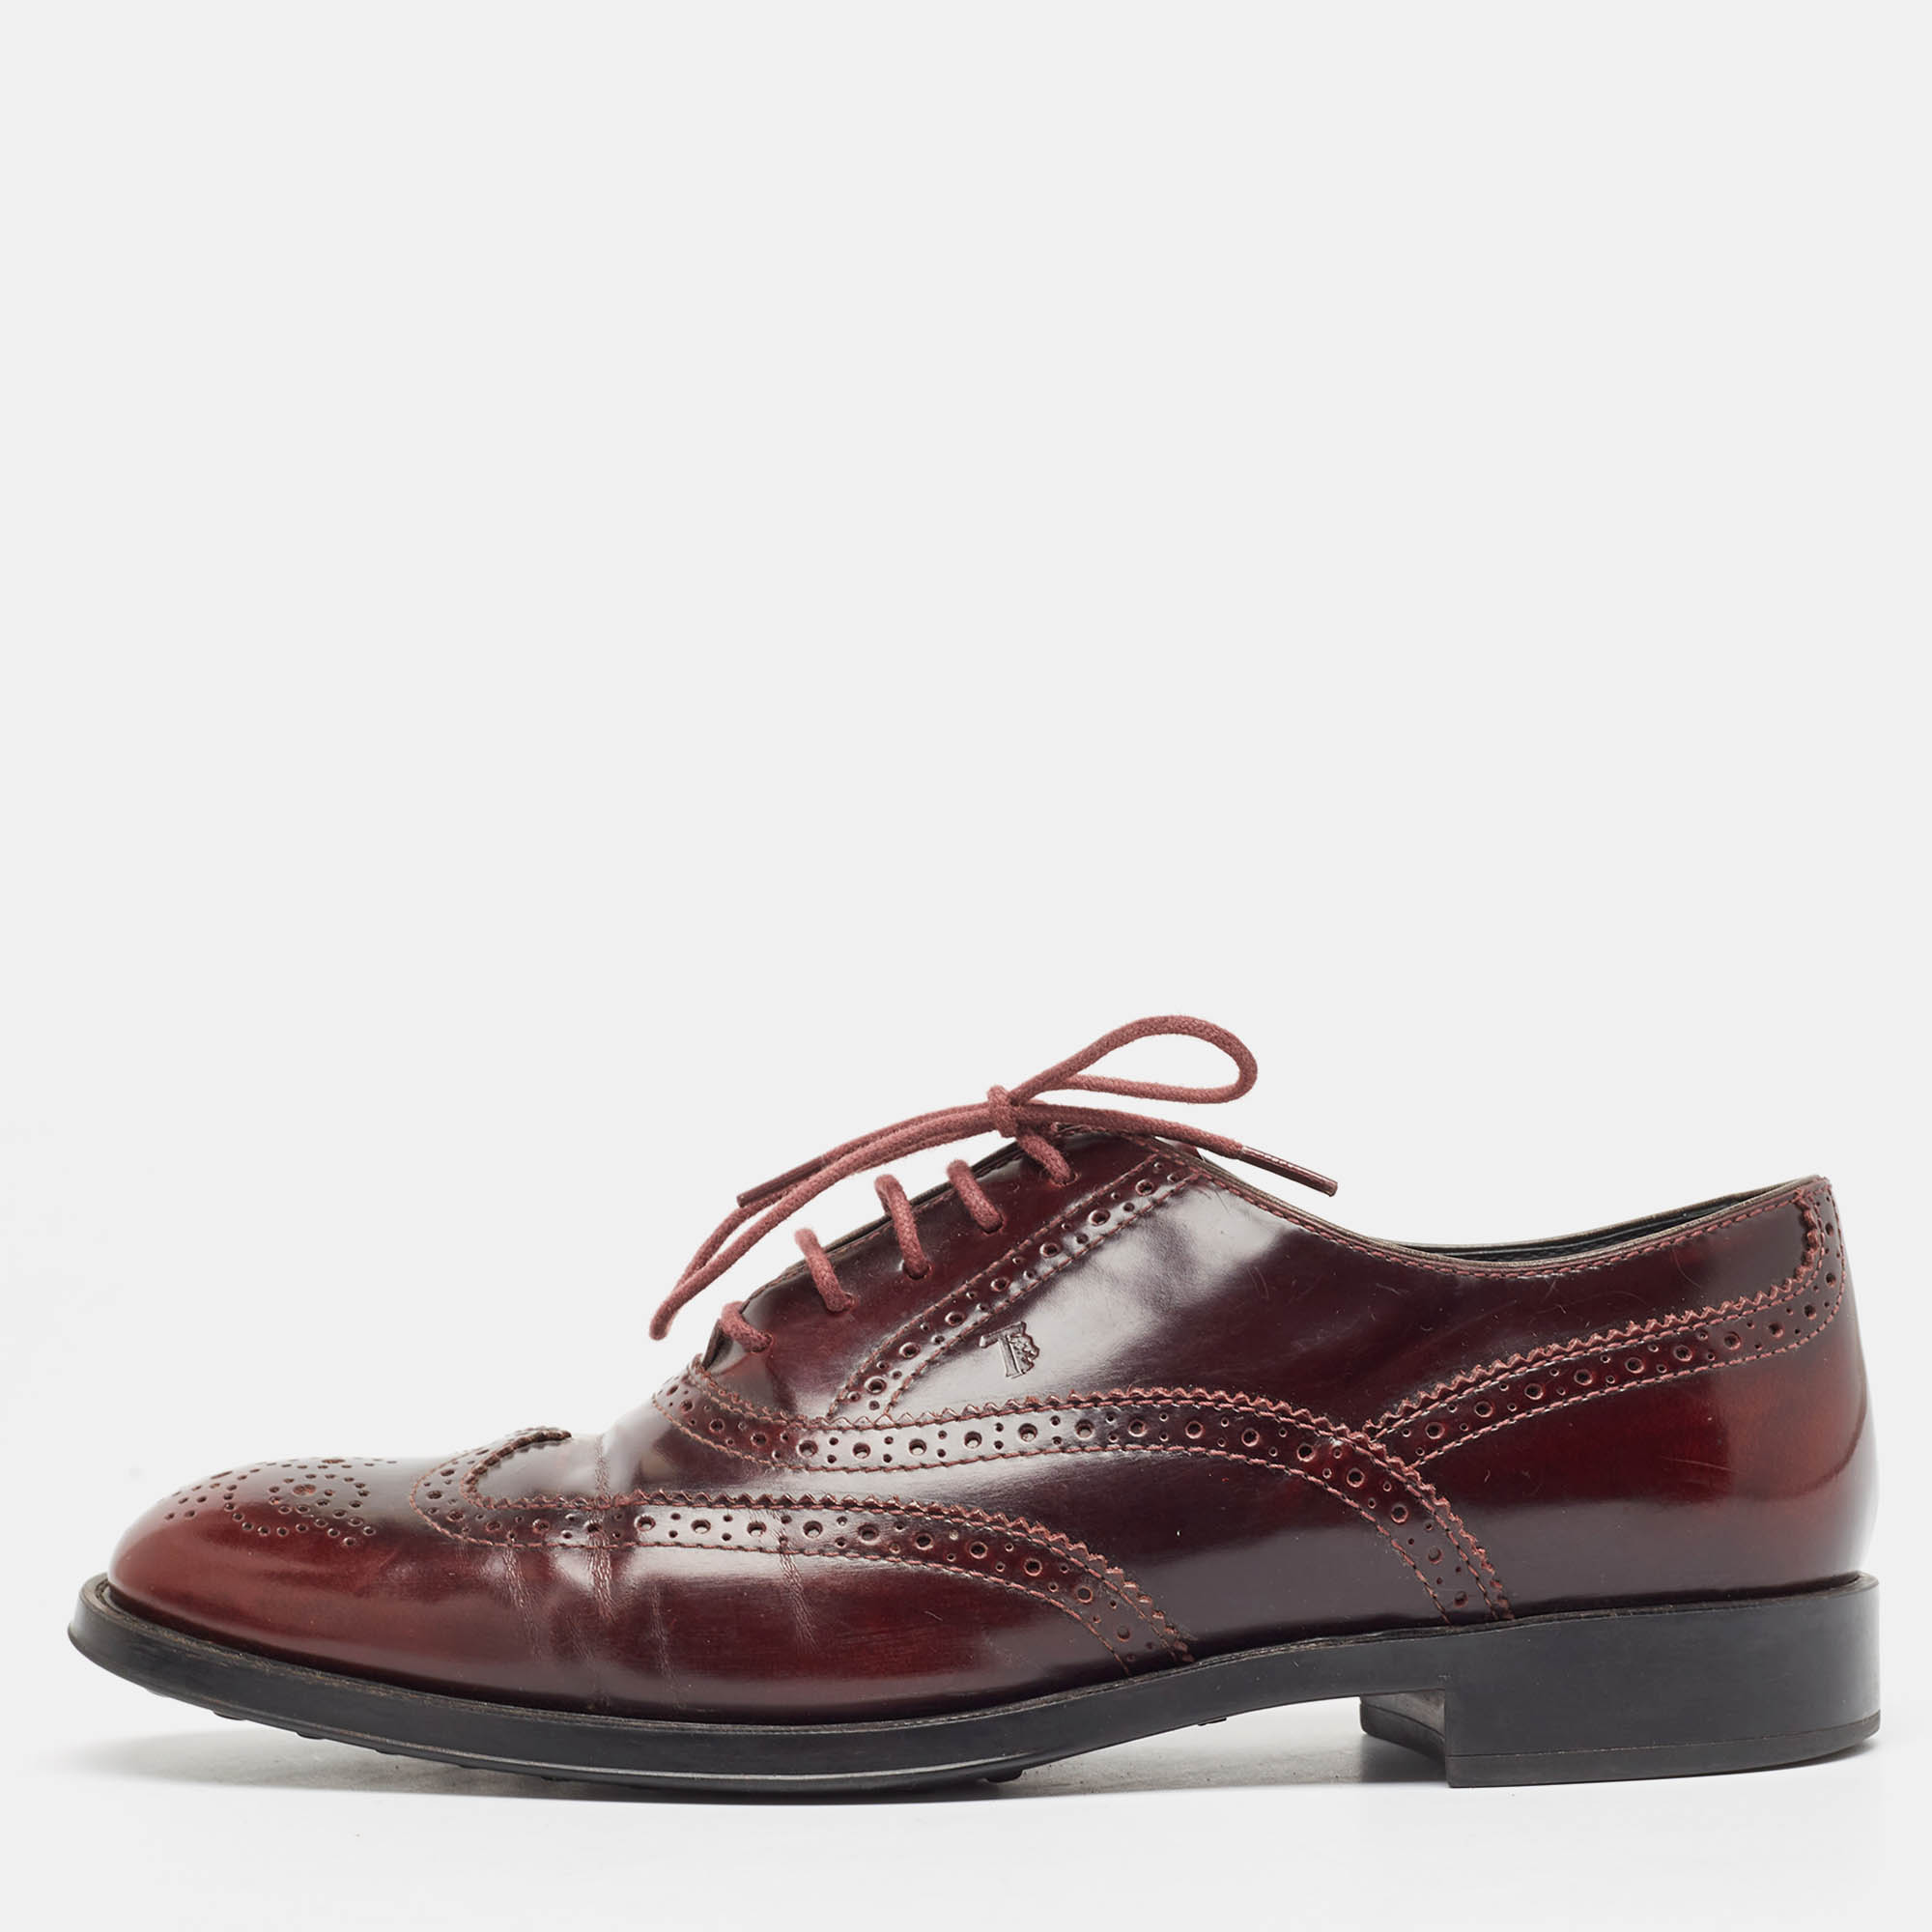 Pre-owned Dolce & Gabbana Burgundy Brogue Leather Lace Up Oxfords Size 38.5